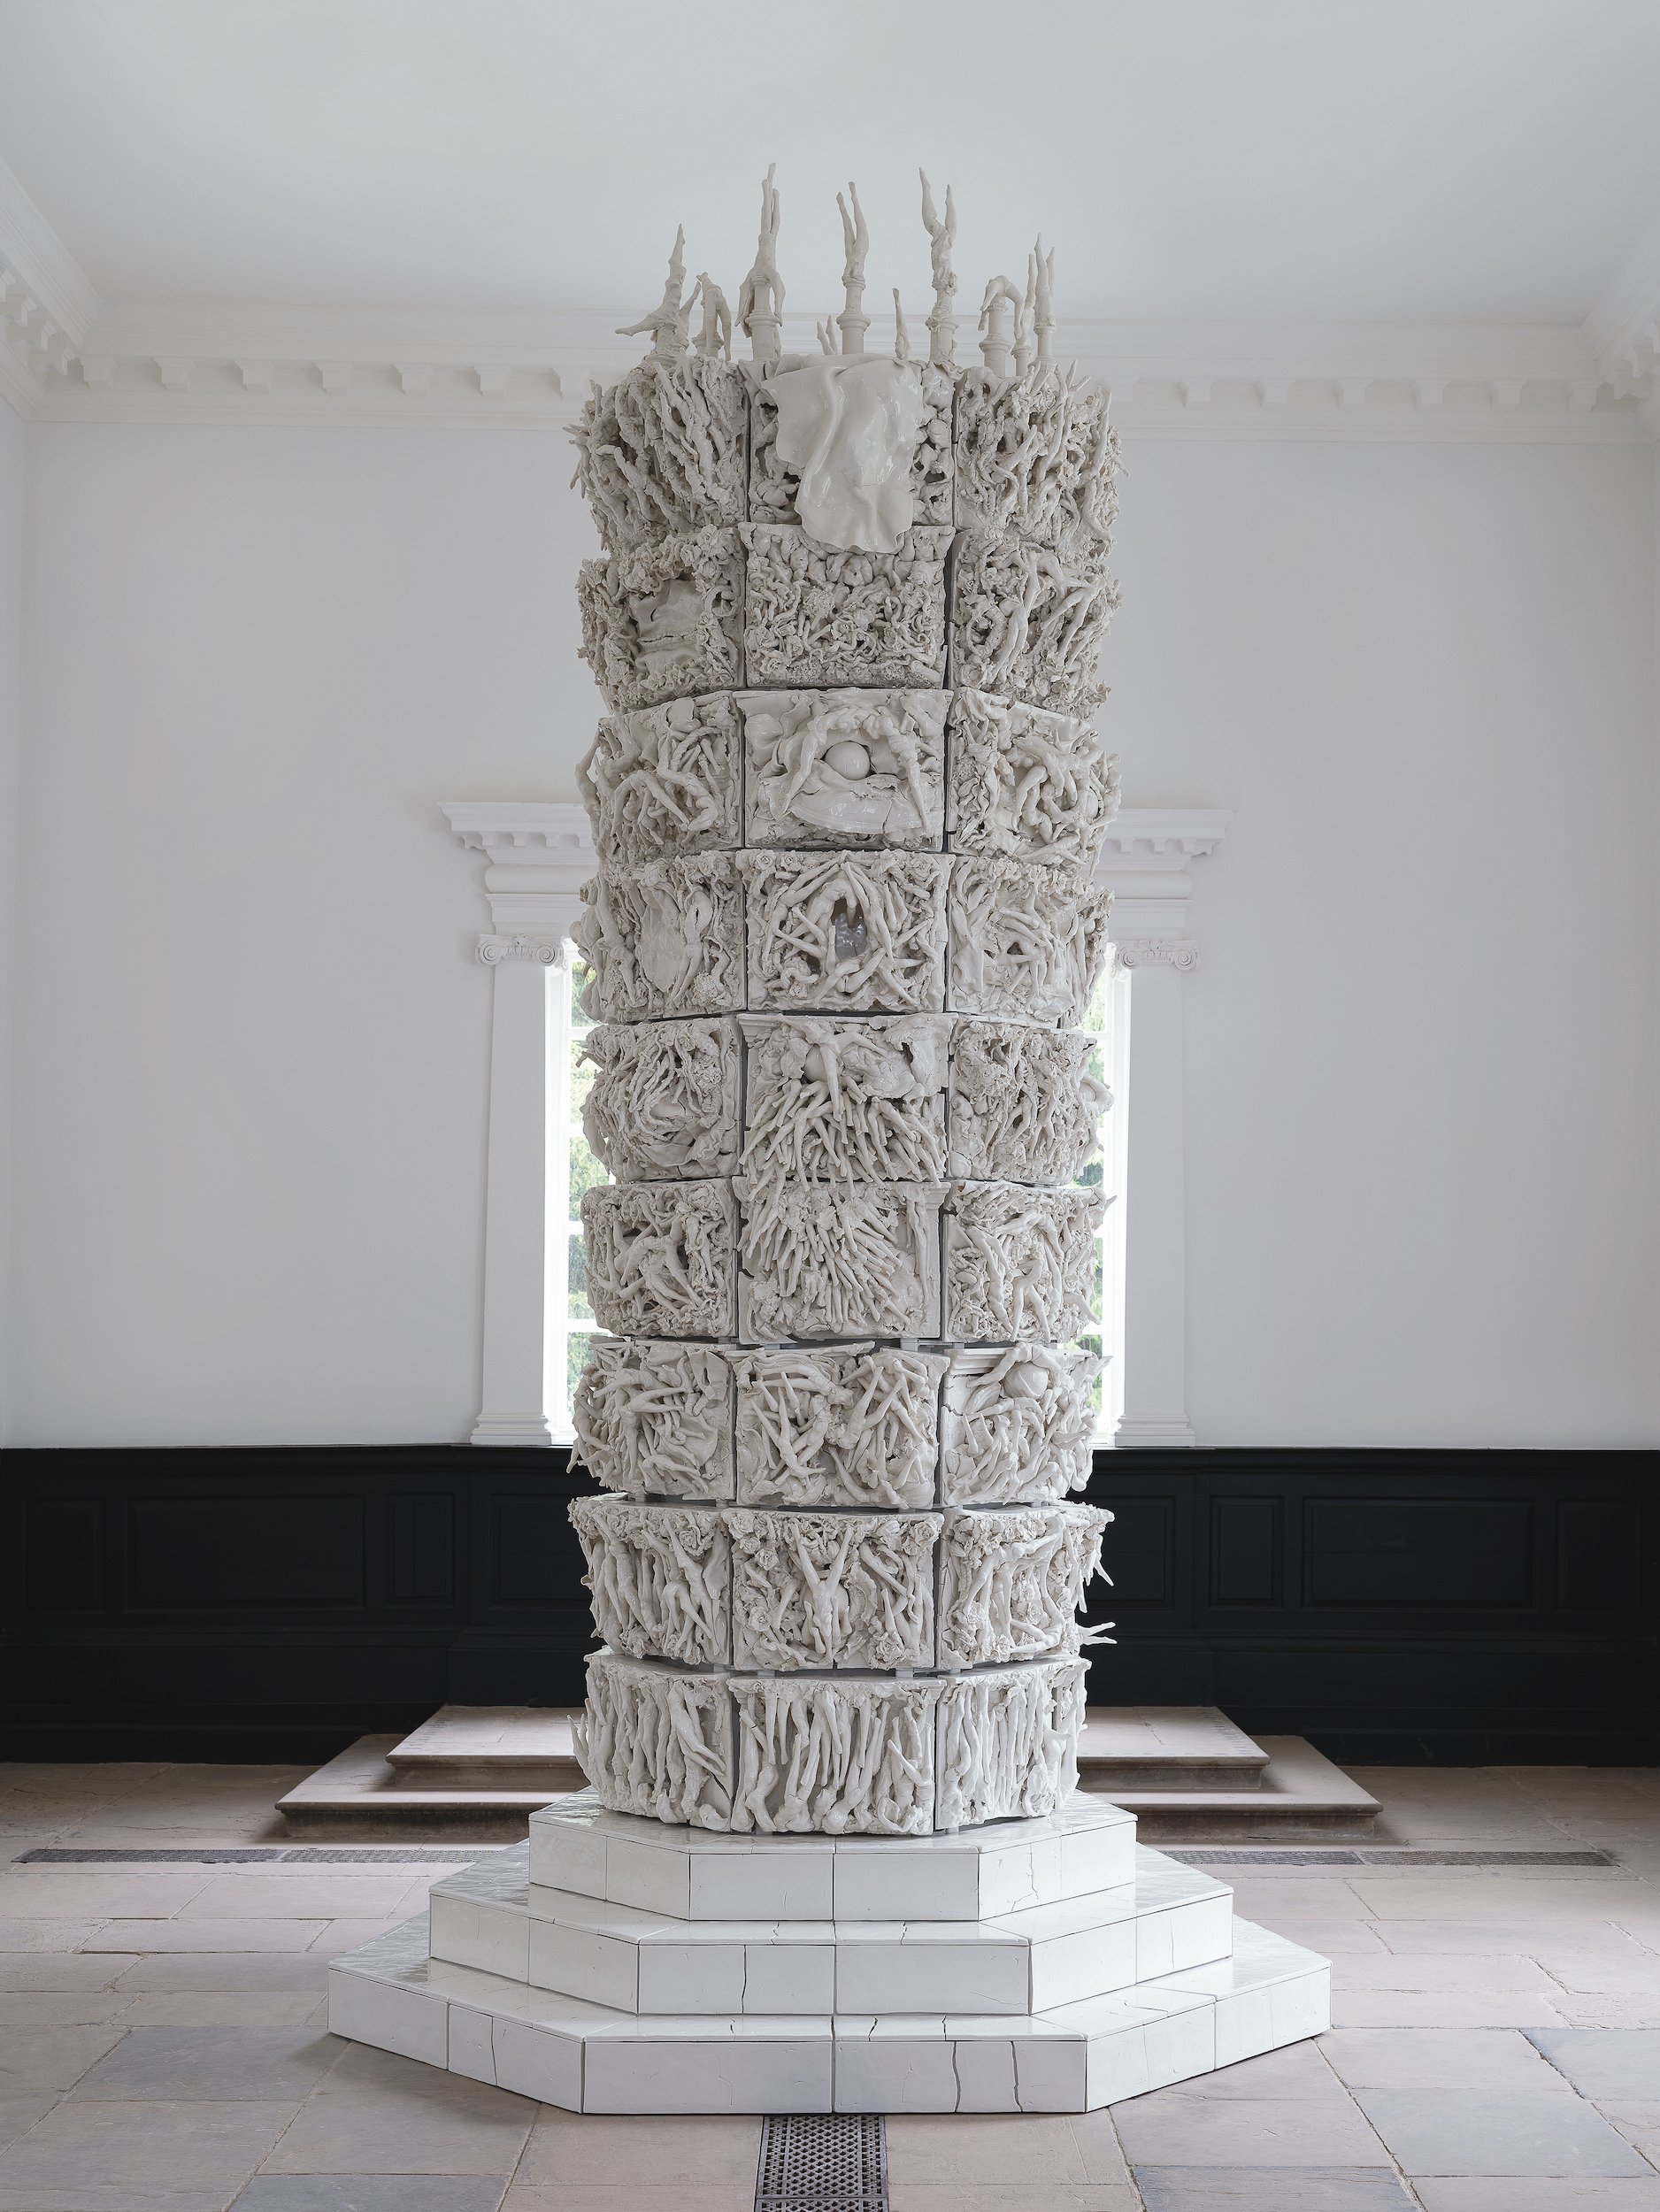 Nine-tiered porcelain column sculpture in the chapel at YSP.